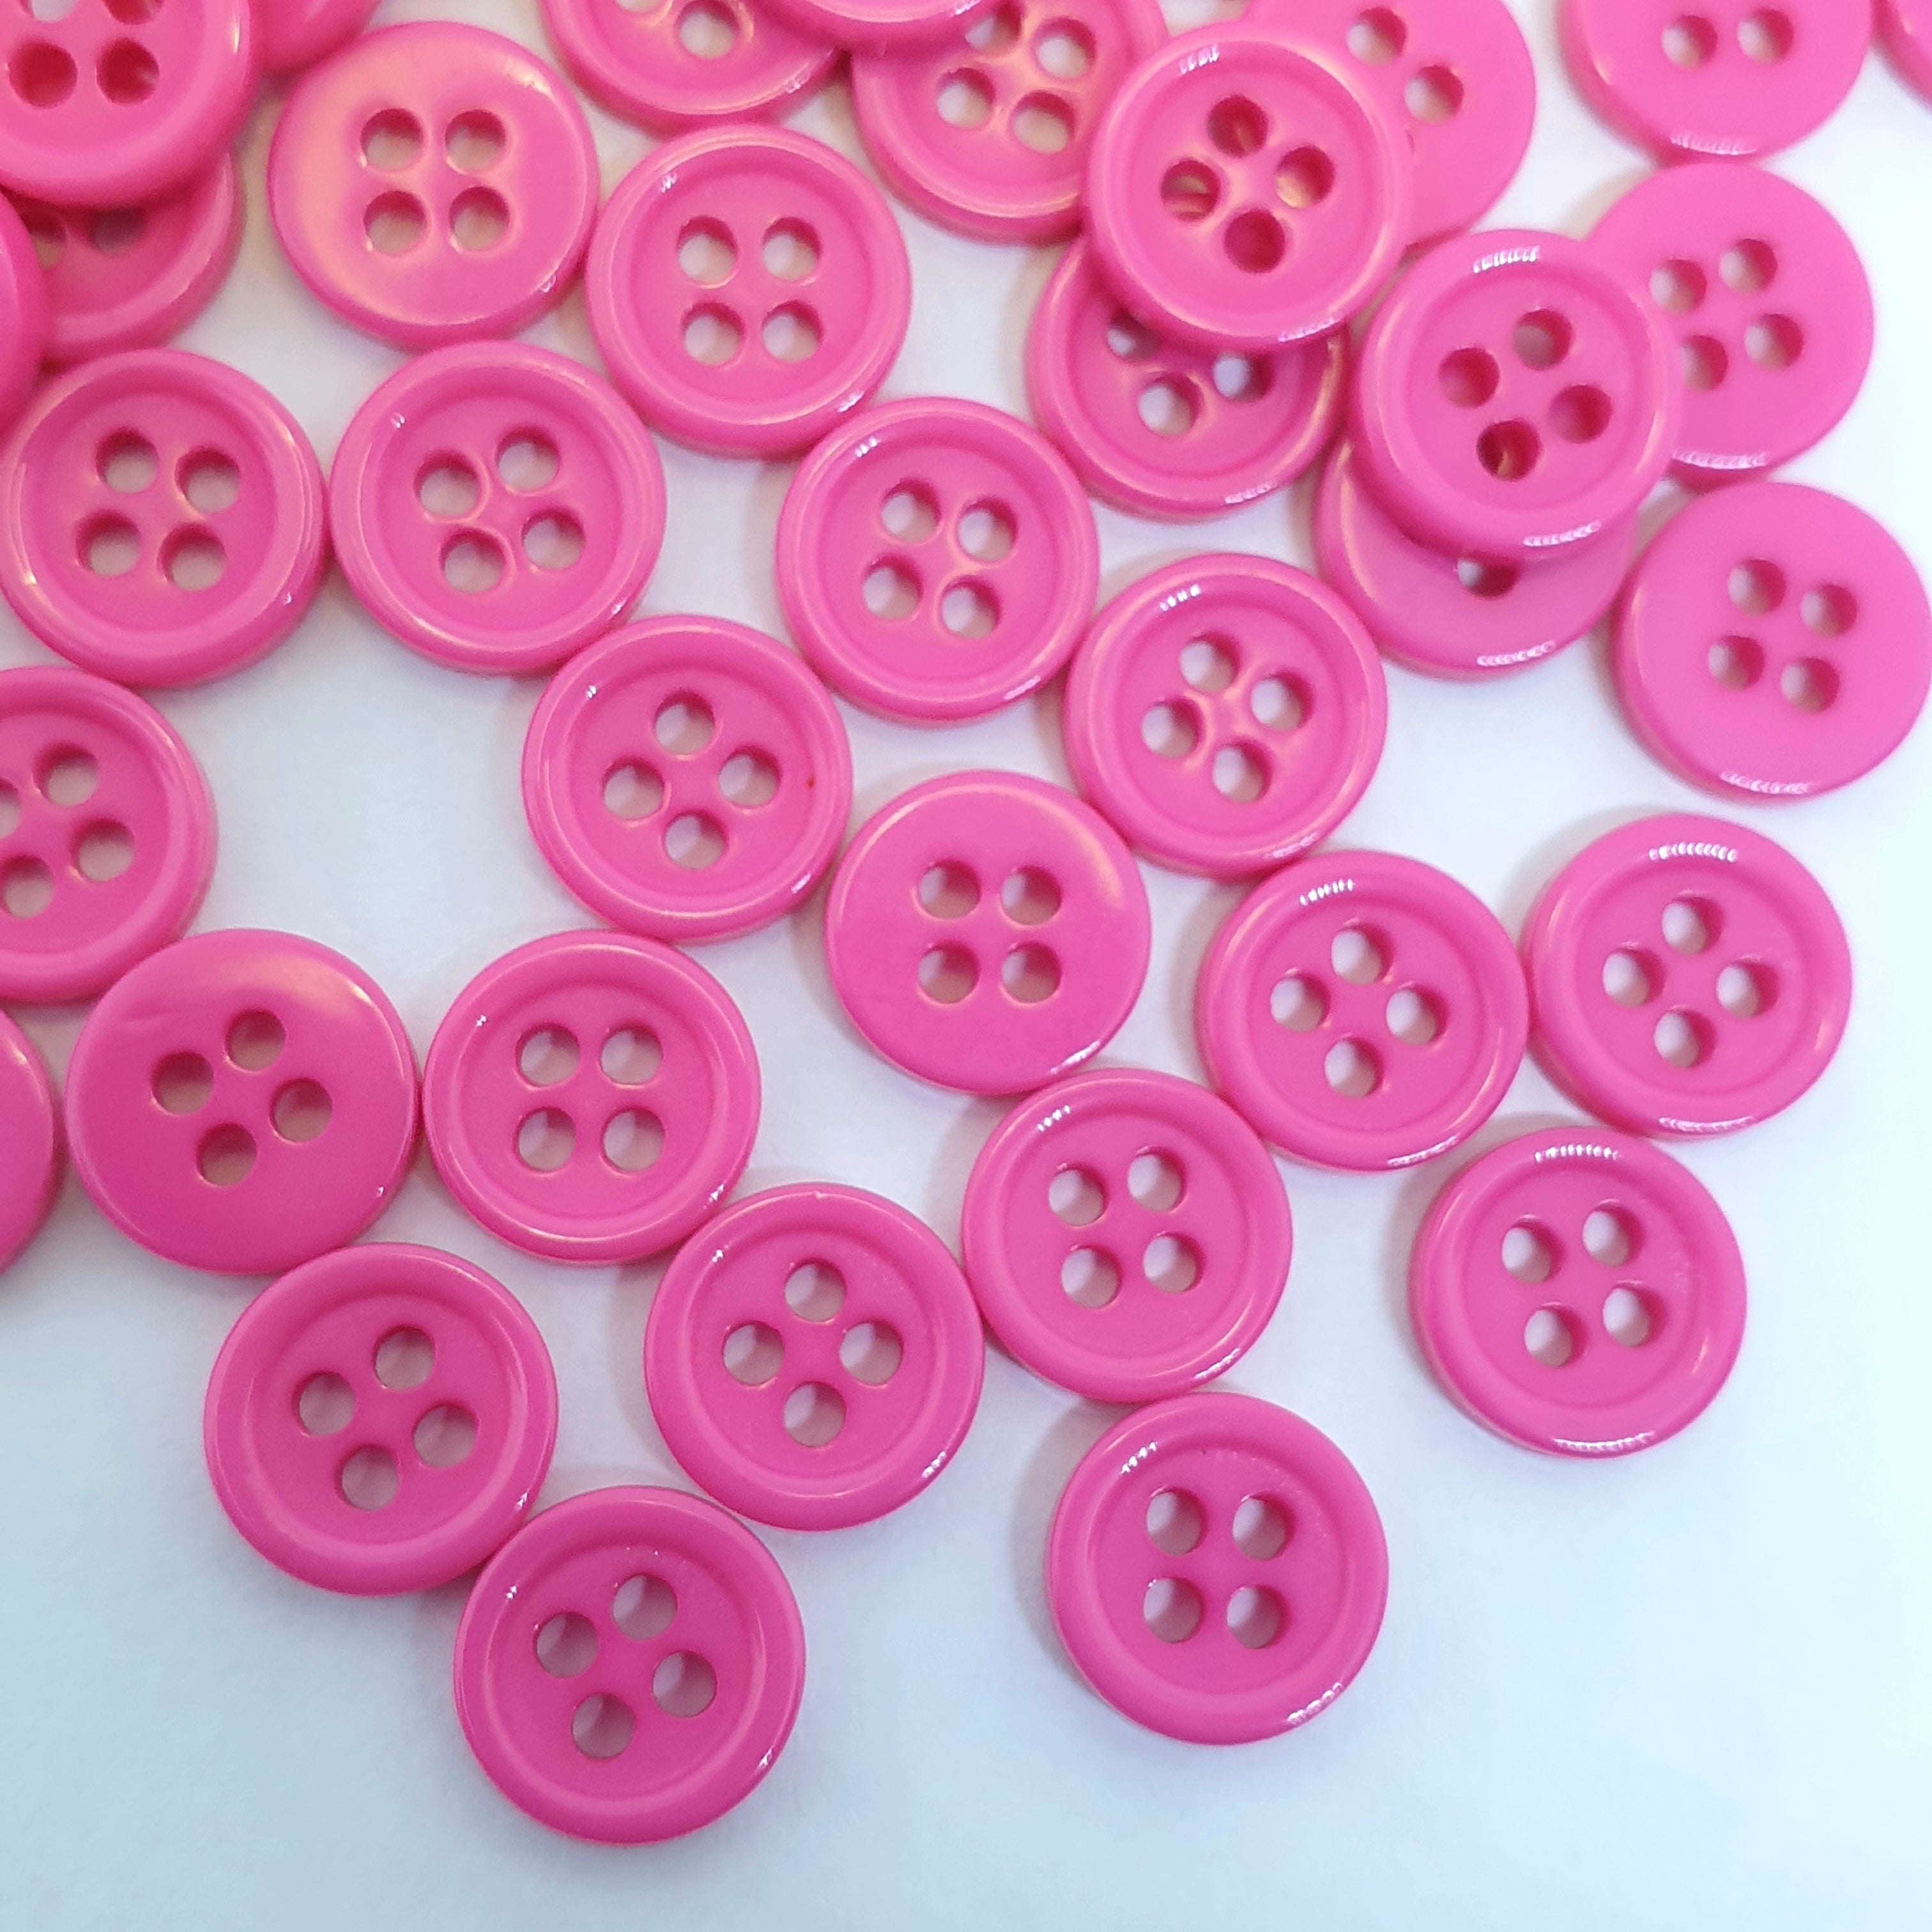 MajorCrafts 120pcs 9mm Hot Pink 4 Holes Small Round Resin Sewing Buttons